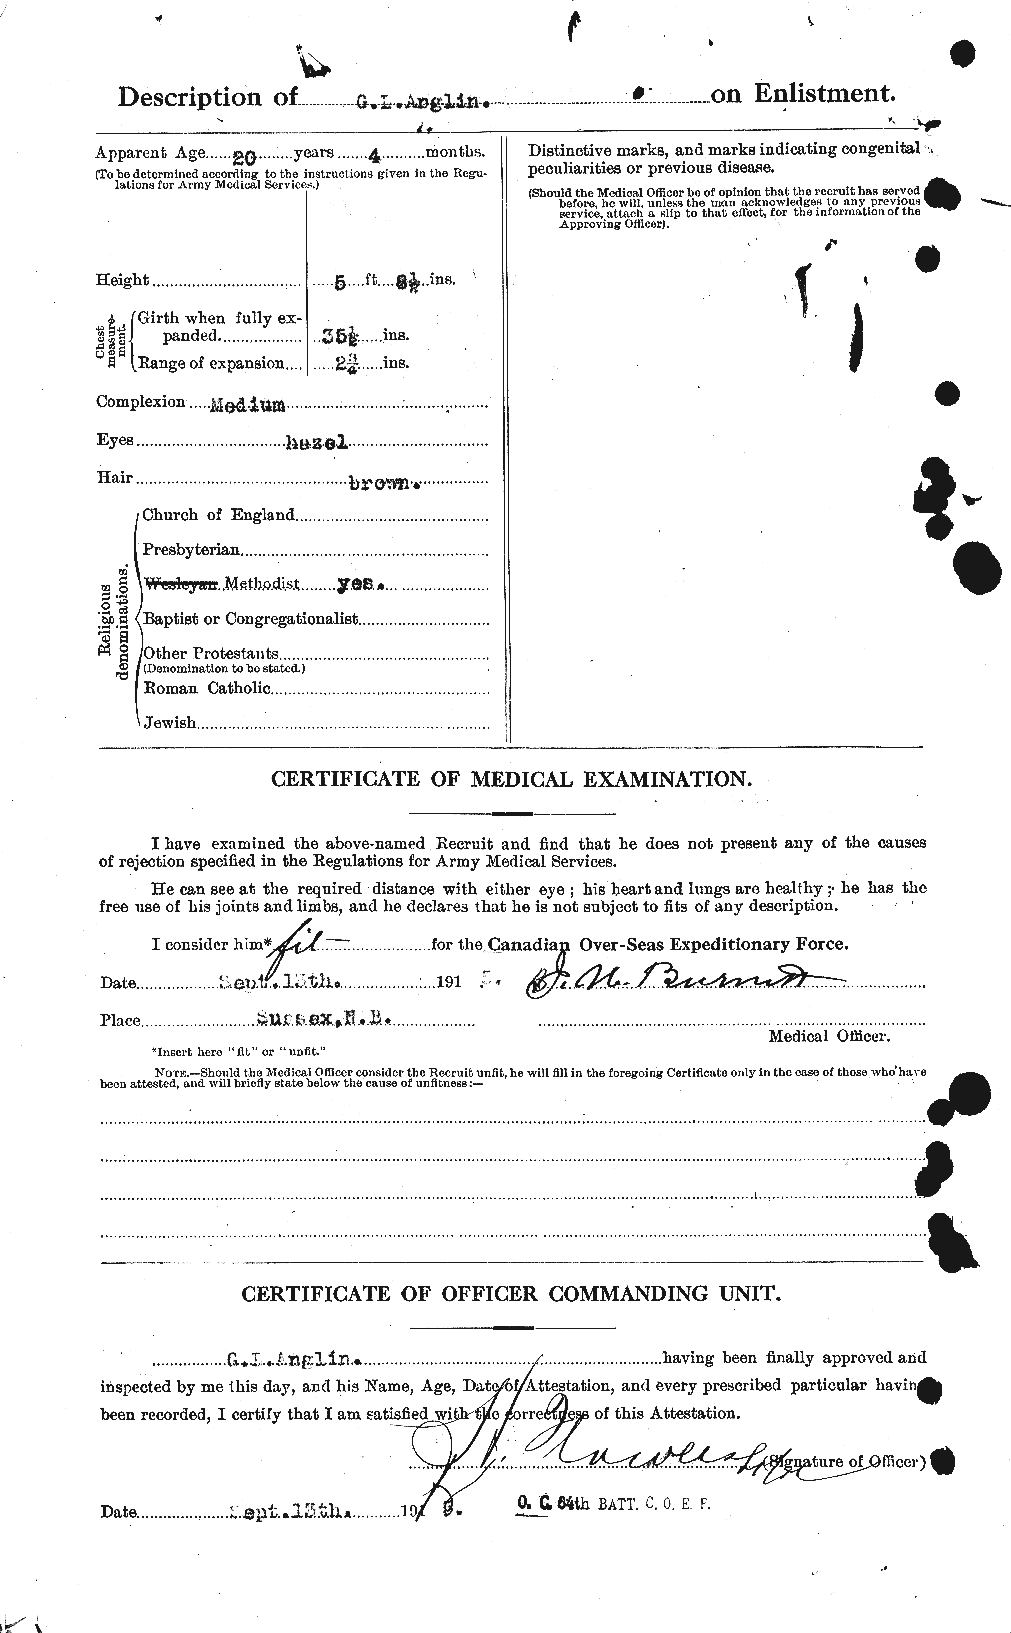 Personnel Records of the First World War - CEF 209152b